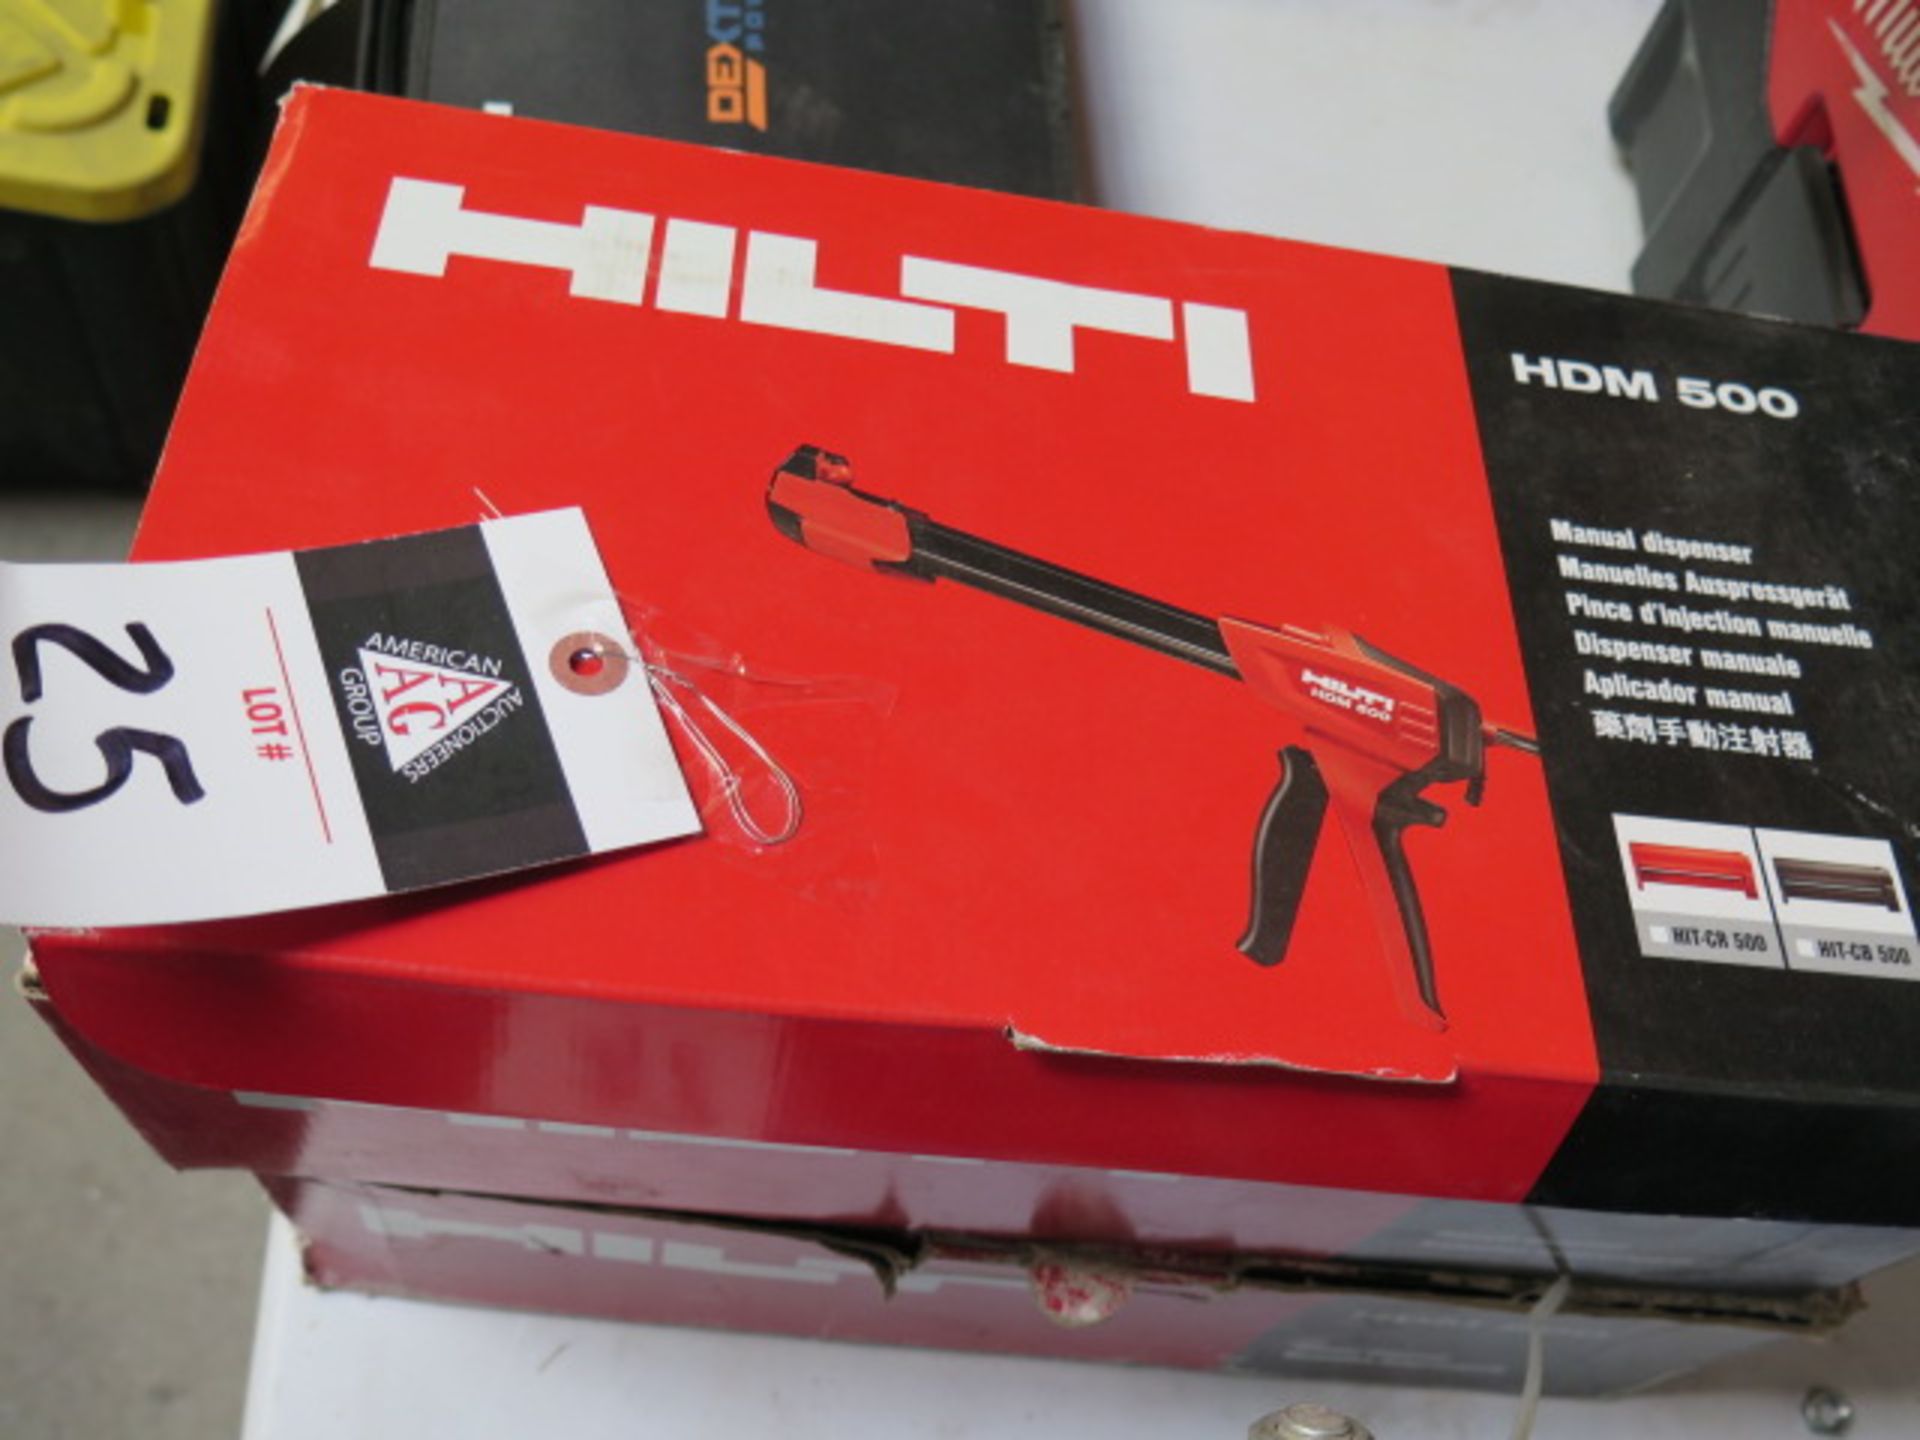 Hilti HDM 500 Manual 2-Part Dispensers (2) (One is NEW - One is used) (SOLD AS-IS - NO WARRANTY) - Image 3 of 5